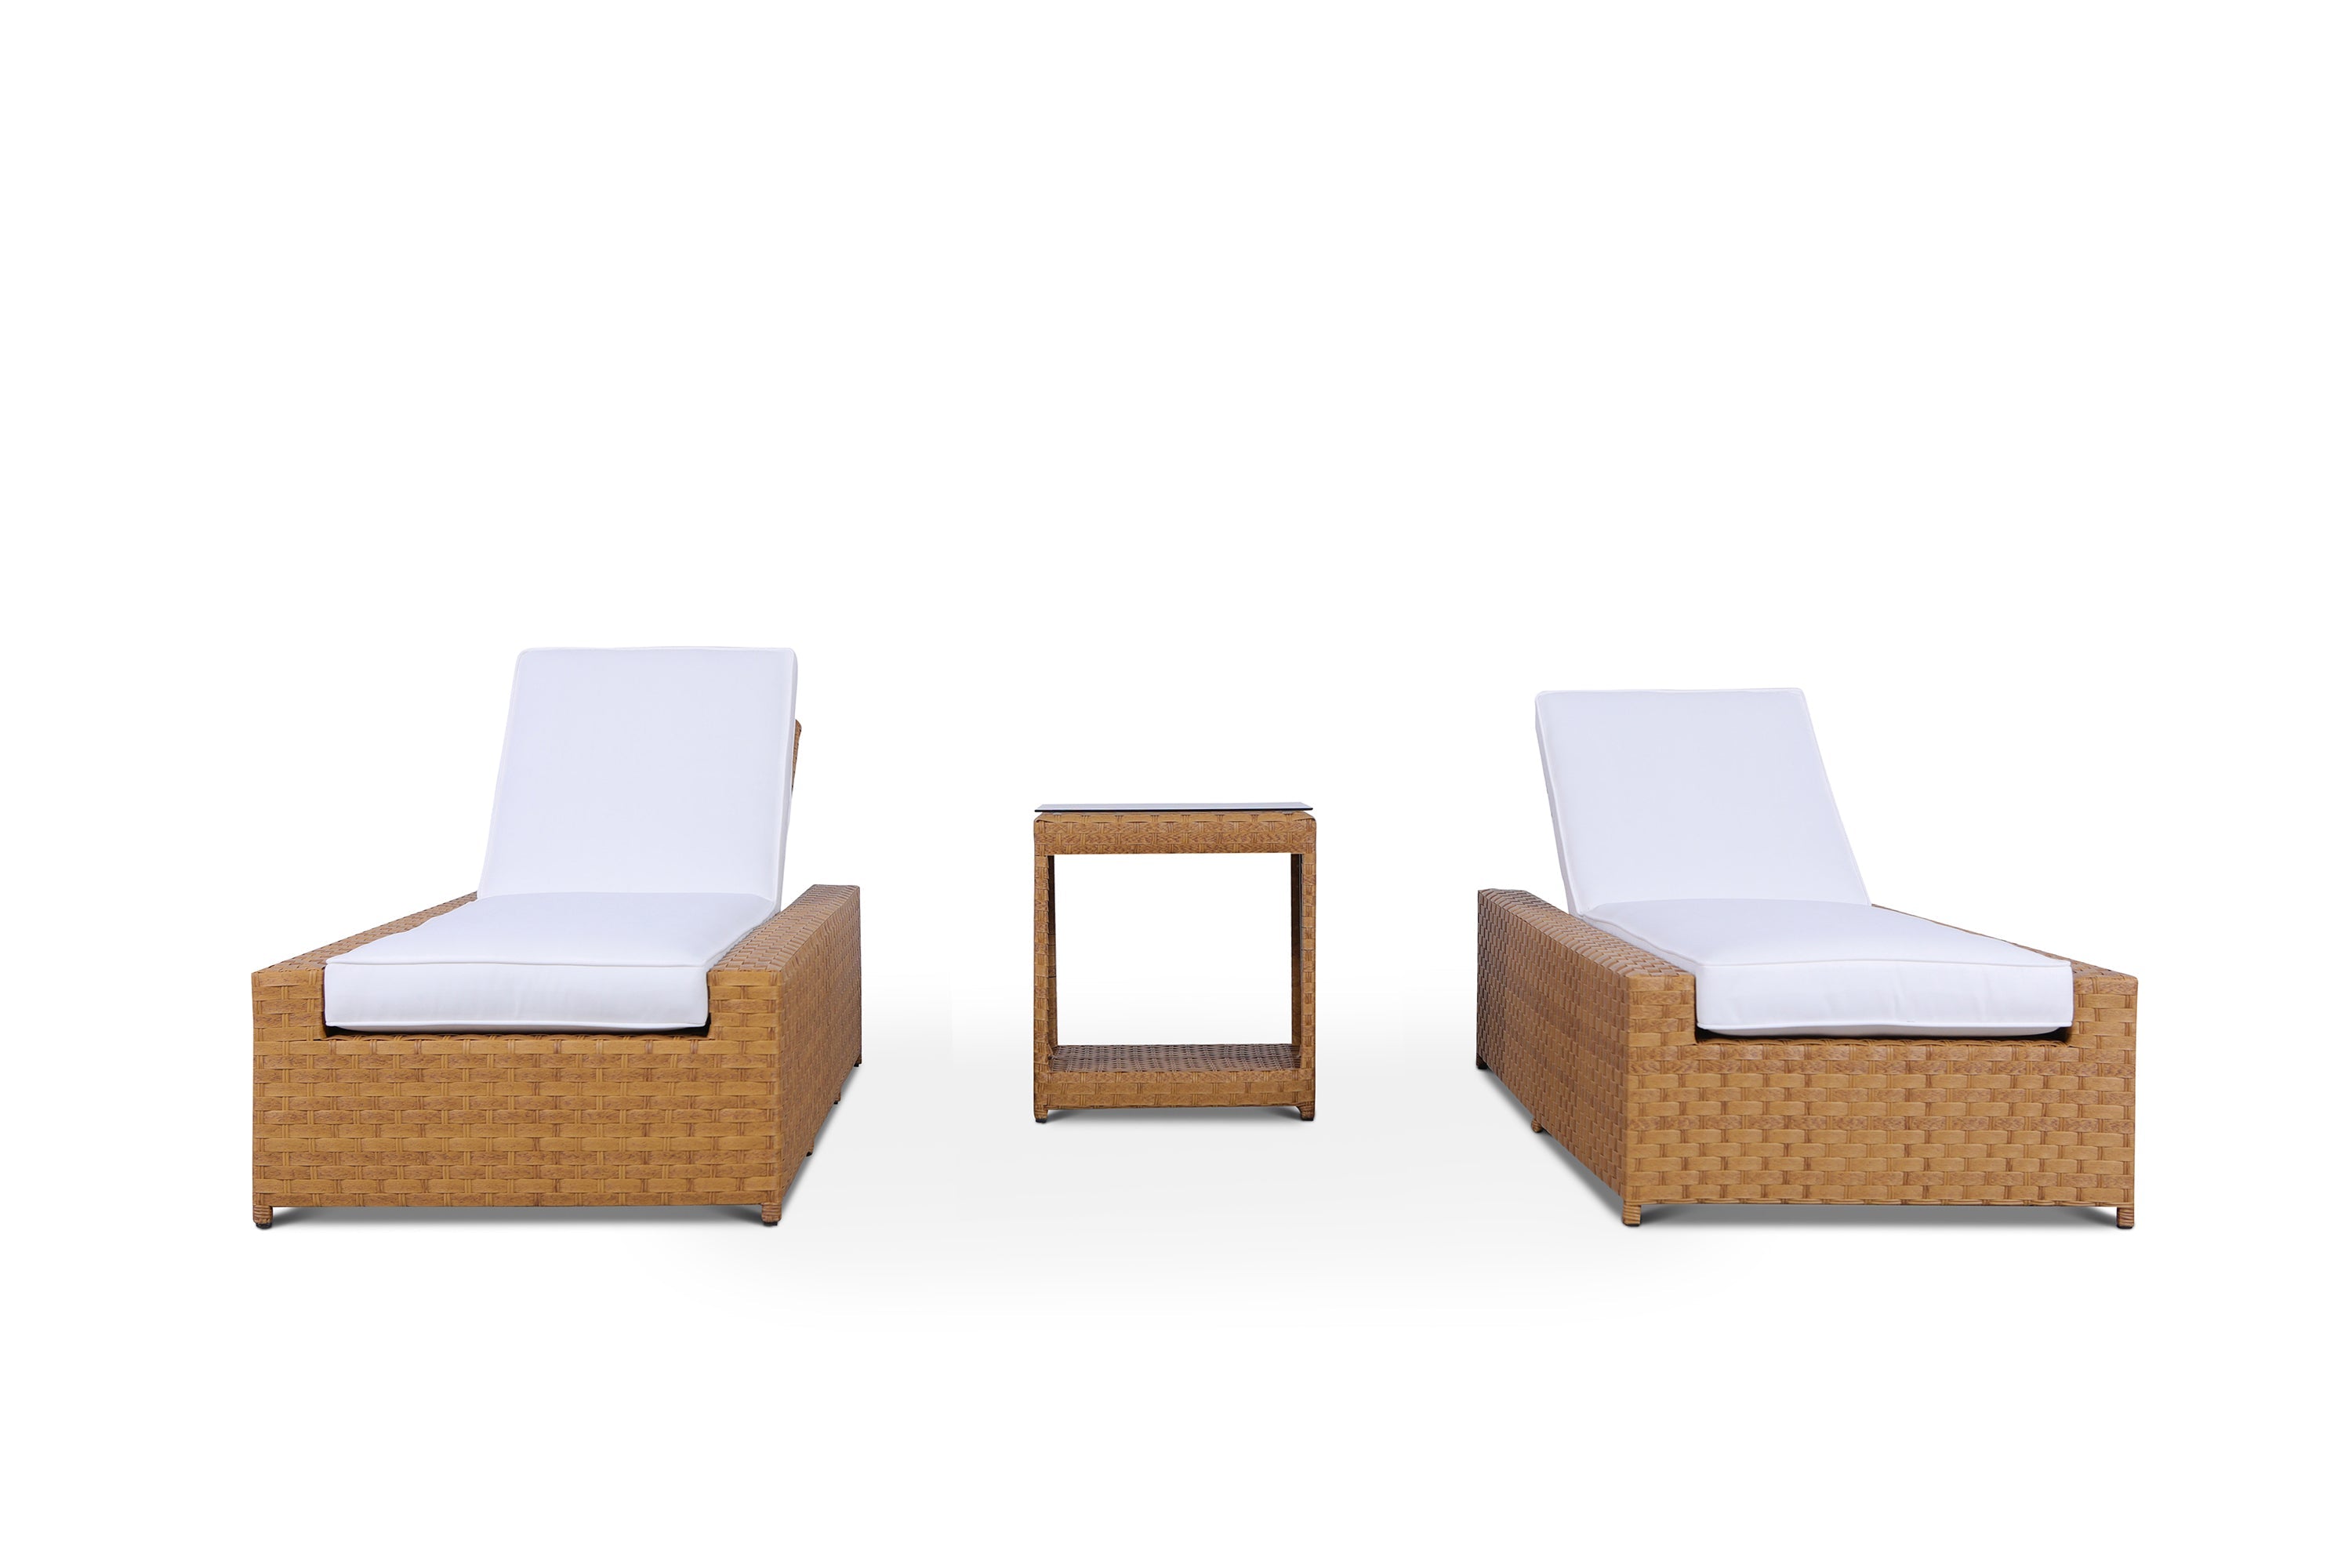 Seabrook 3 Piece Set of Outdoor Wicker Chaise Lounges with End Table